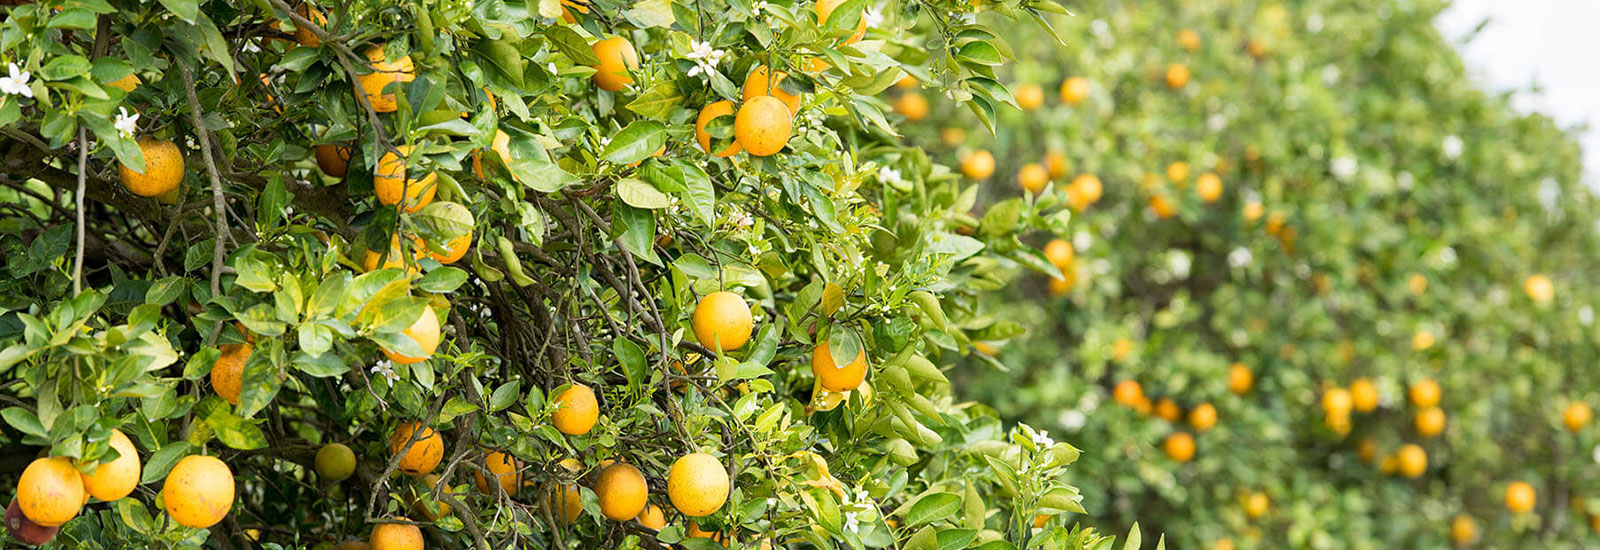 An integrated approach for establishment of new citrus plantings faced with the HLB threat